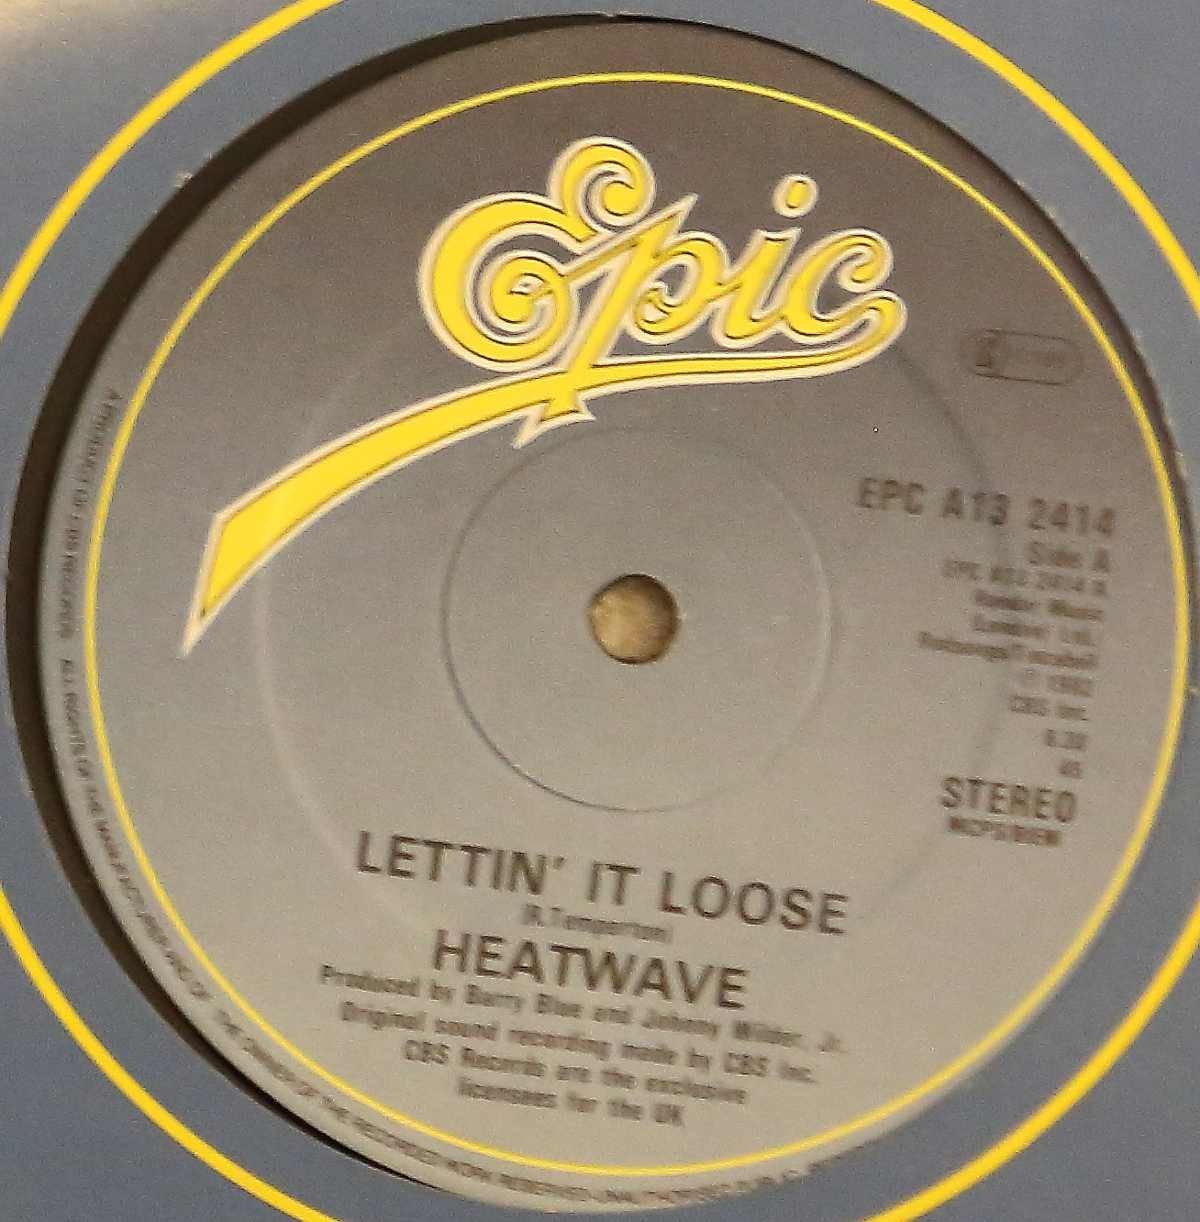 Heatwave - Lettin it loose / Mind what you find (12" Vinyl Record)